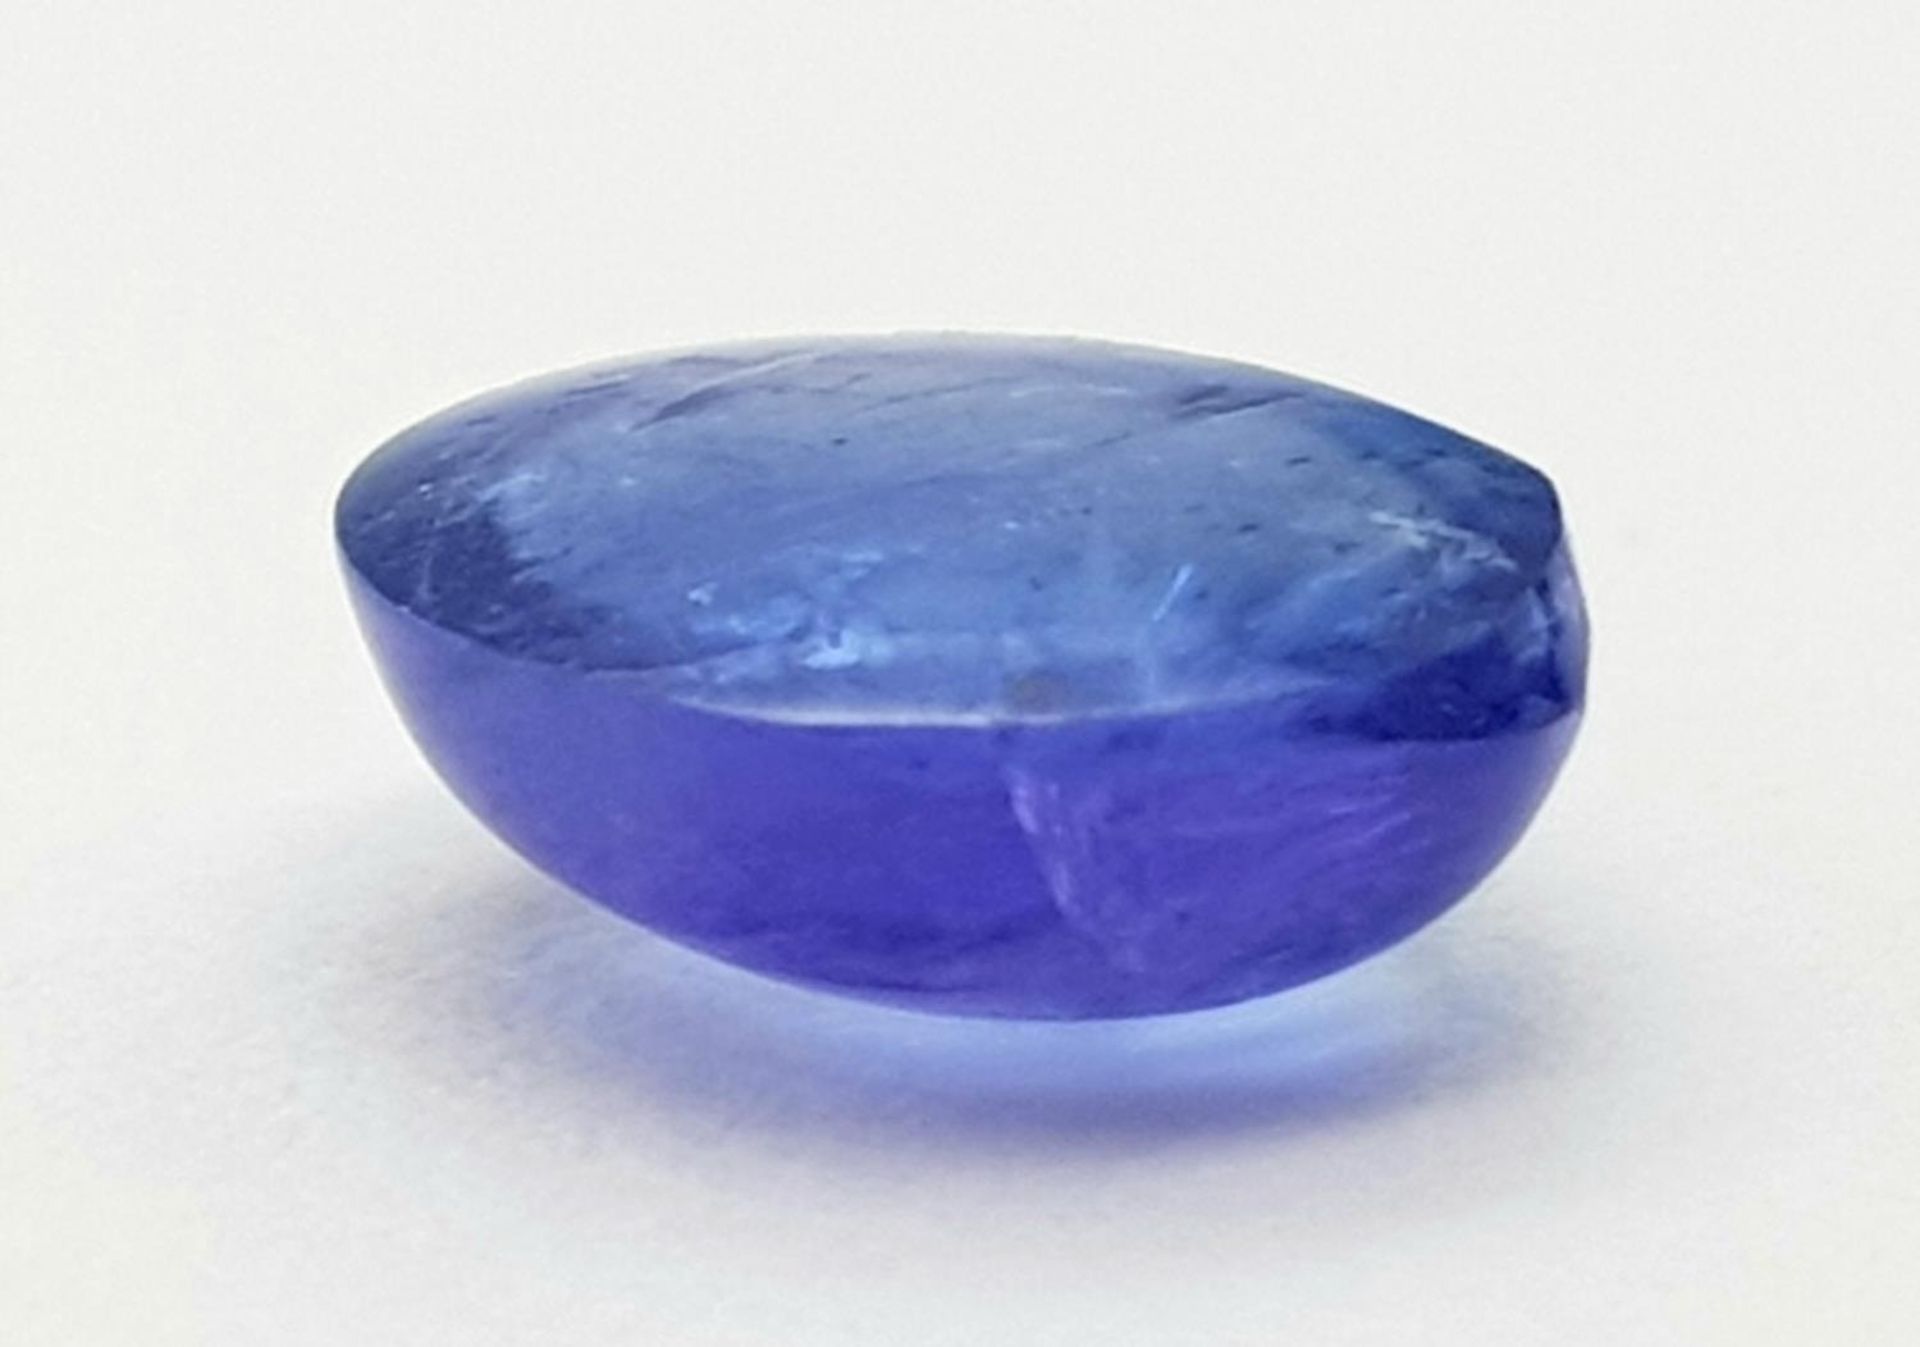 A 1.21ct Tanzanite Cabochon - GFCO Swiss Certified. - Image 2 of 6